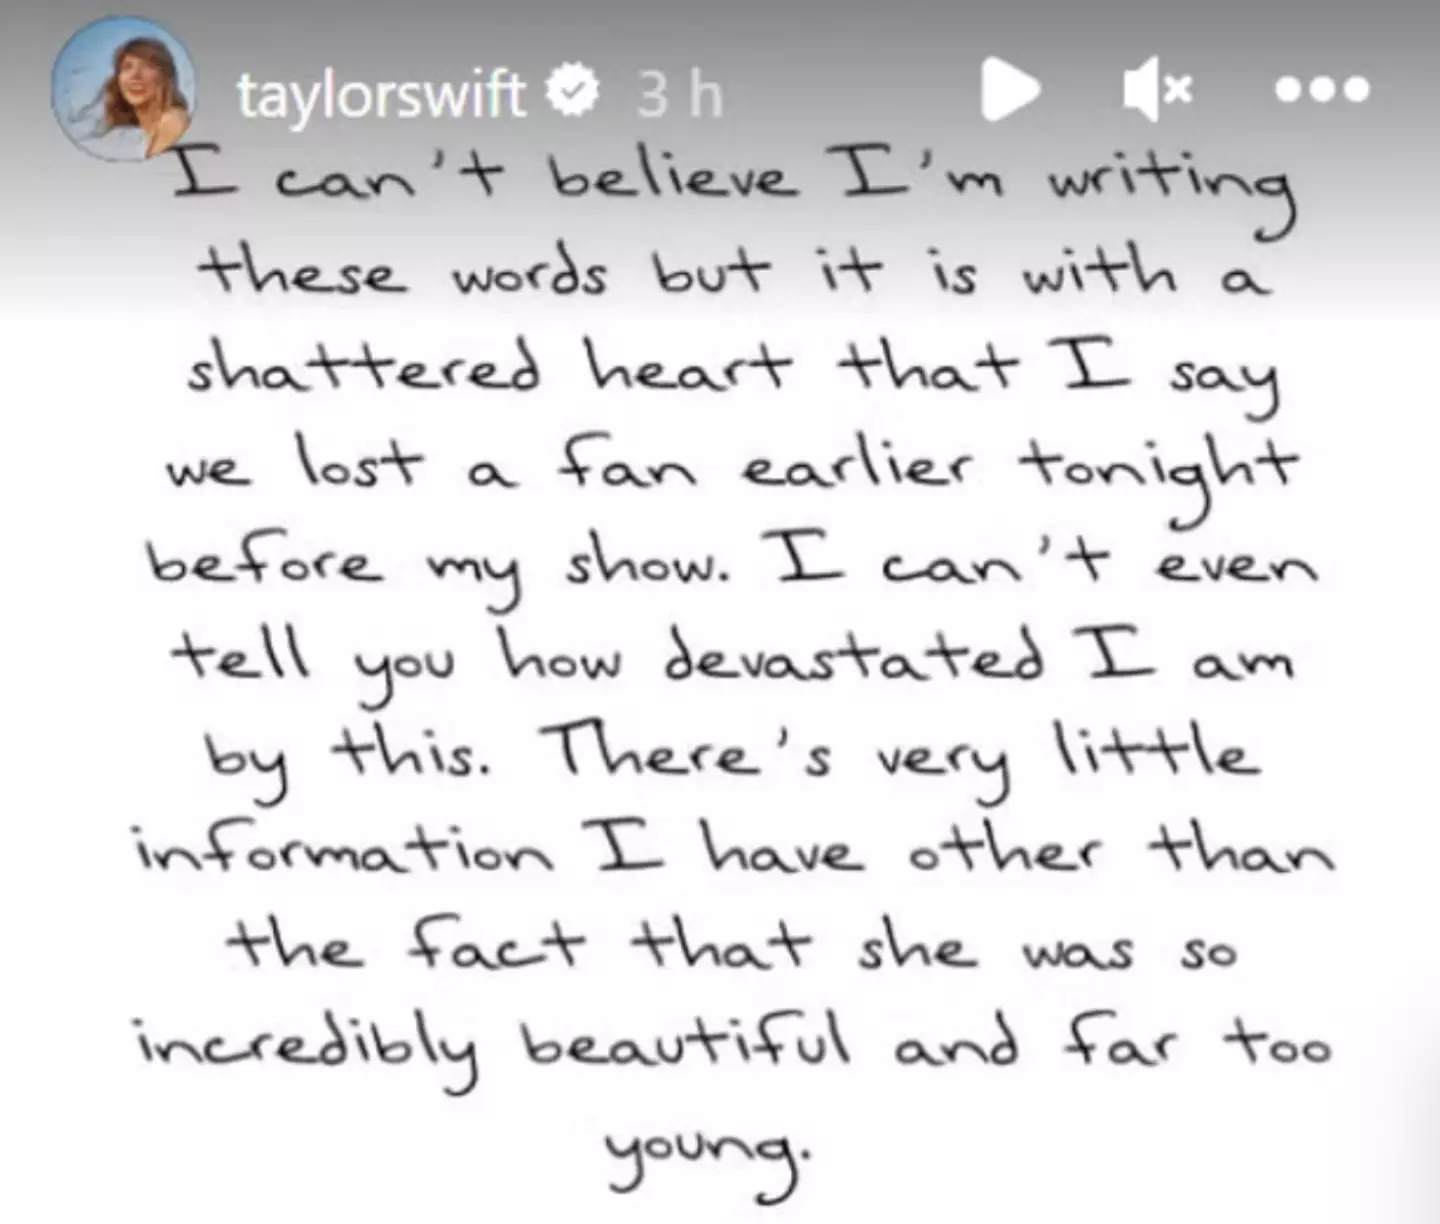 Taylor Swift shared tribute to Benevides on Instagram.